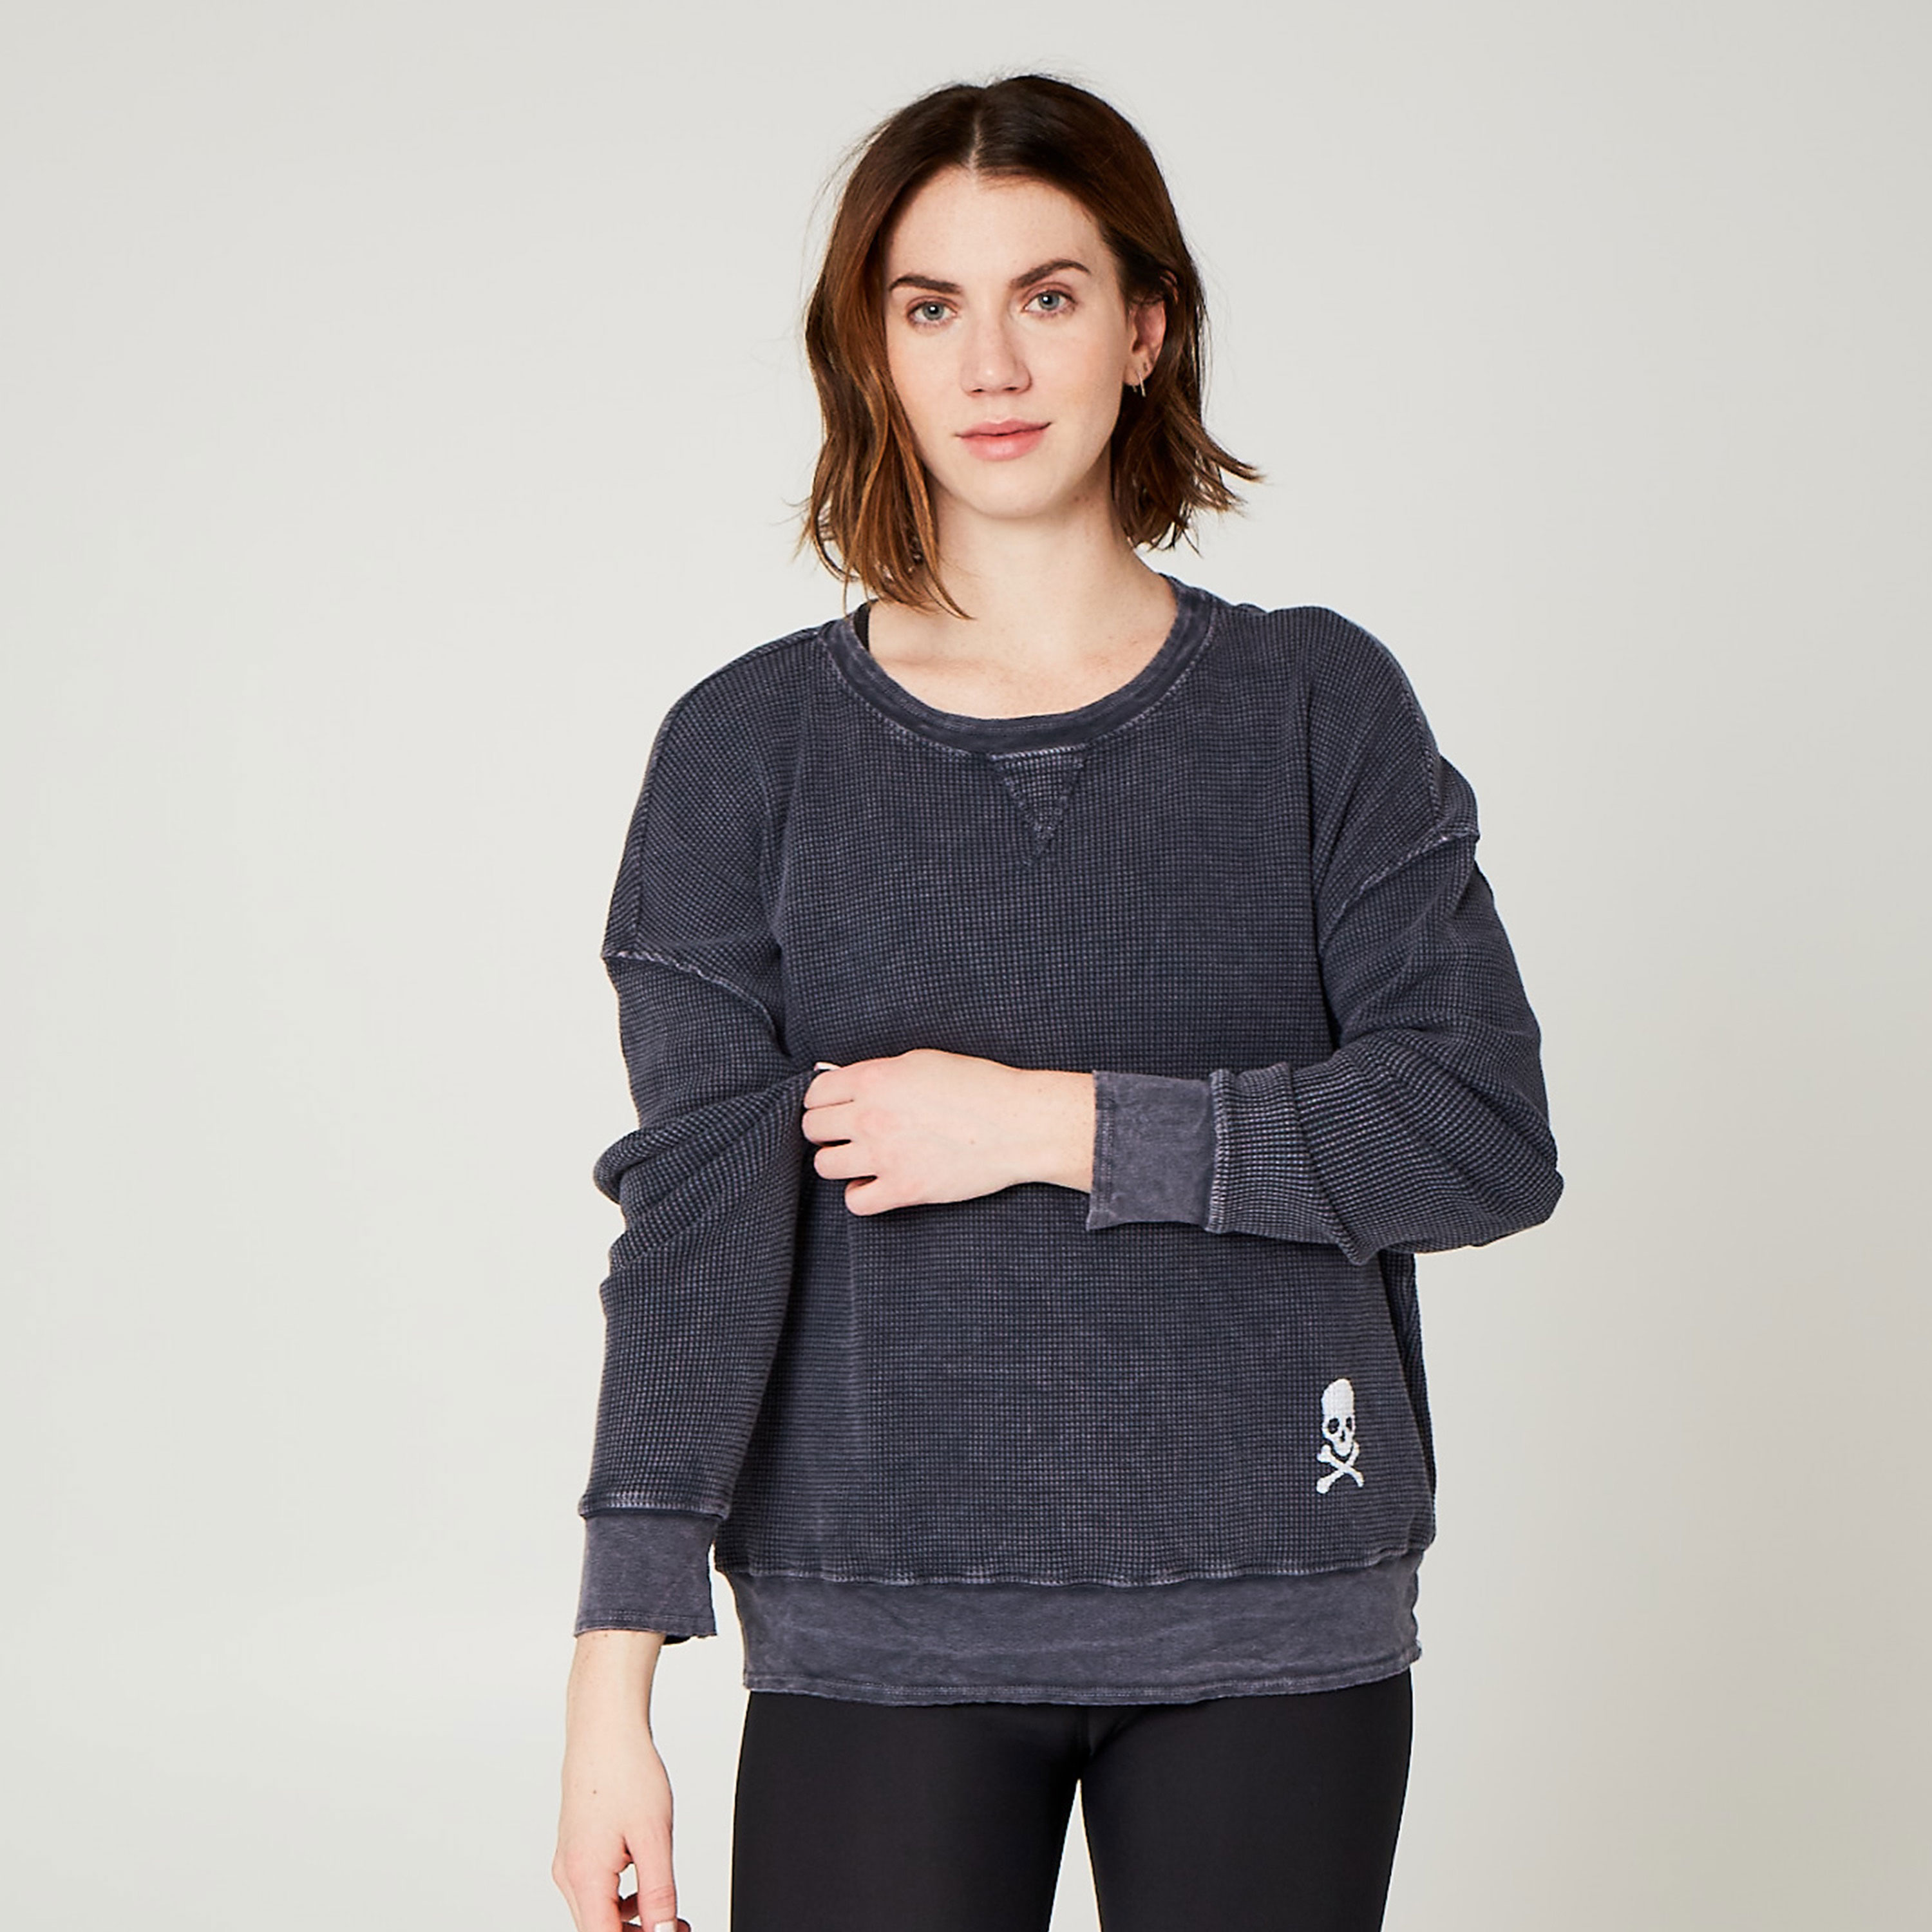 Soul by SoulCycle Waffle Long Sleeve Shirt - SoulCycle Shop